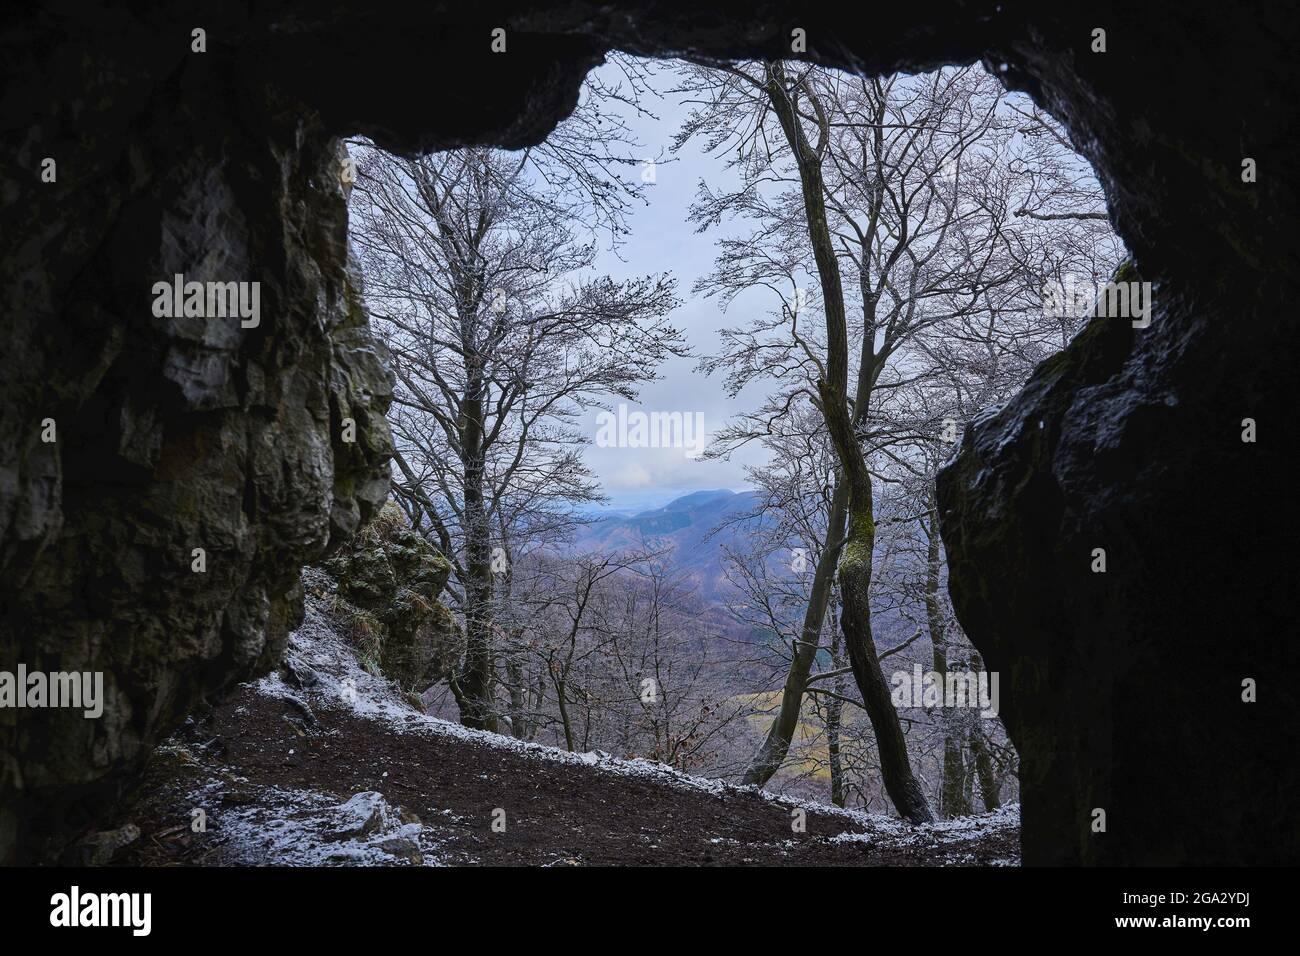 View out of a cave with snowy European beech (Fagus sylvatica) trees at Mount Vapec in the Strazov Mountains Stock Photo